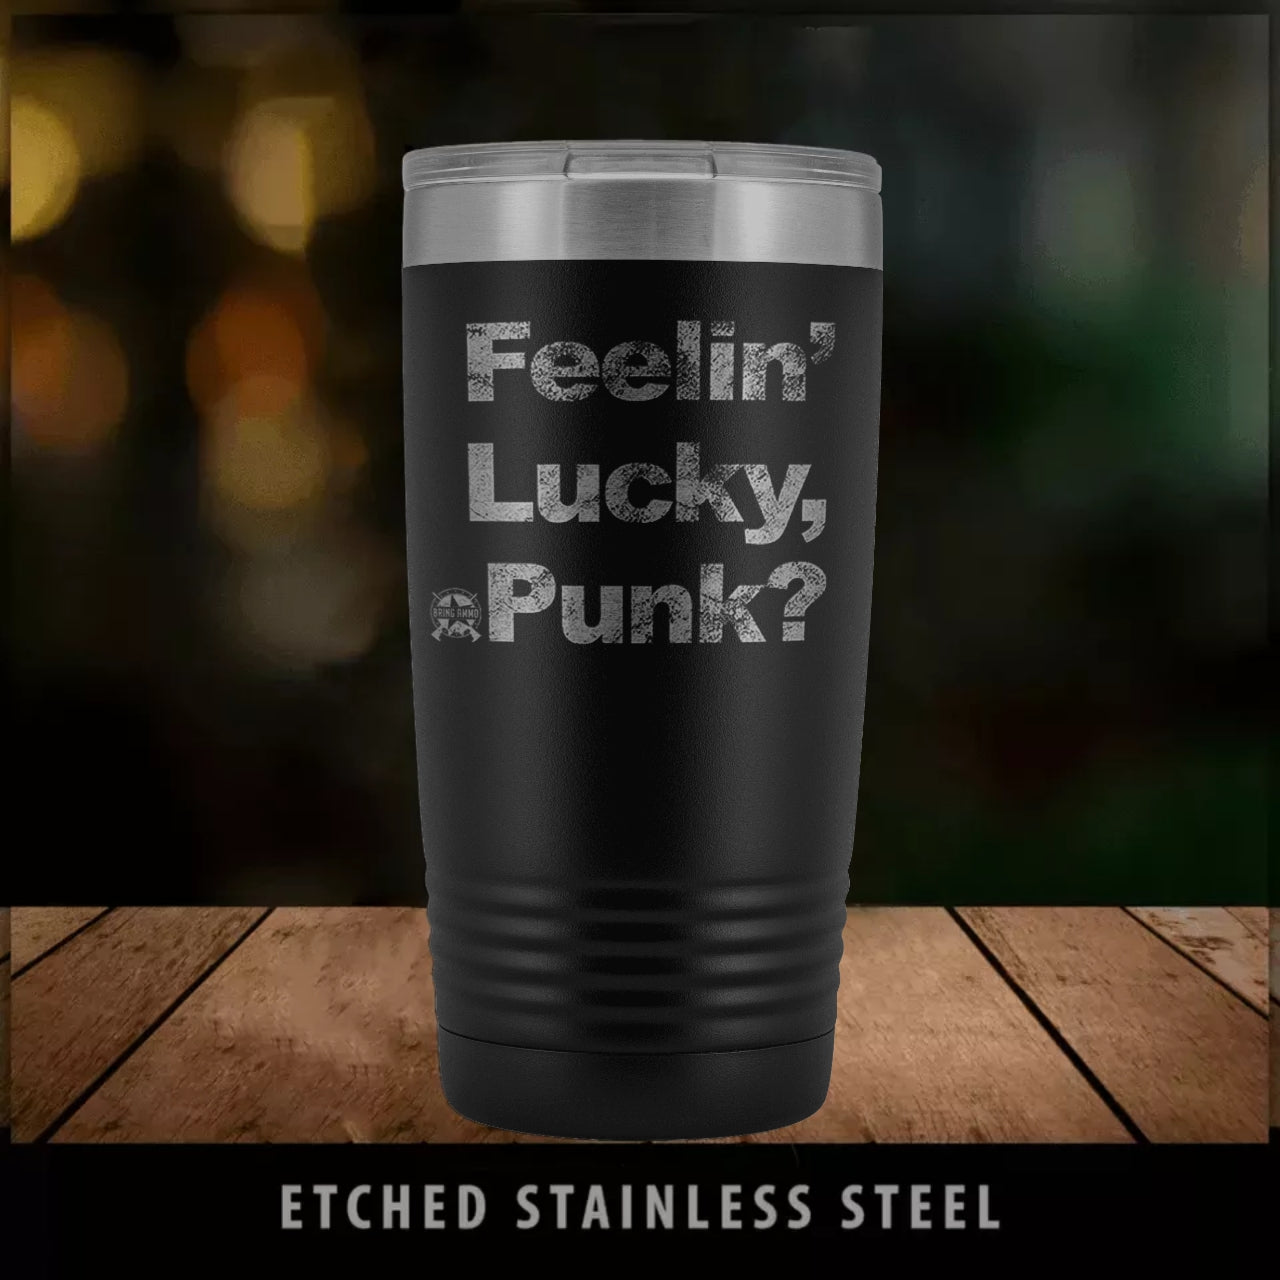 Feelin' Lucky, Punk? Dirty Harry Stainless Etched Tumbler Tumblers Black 